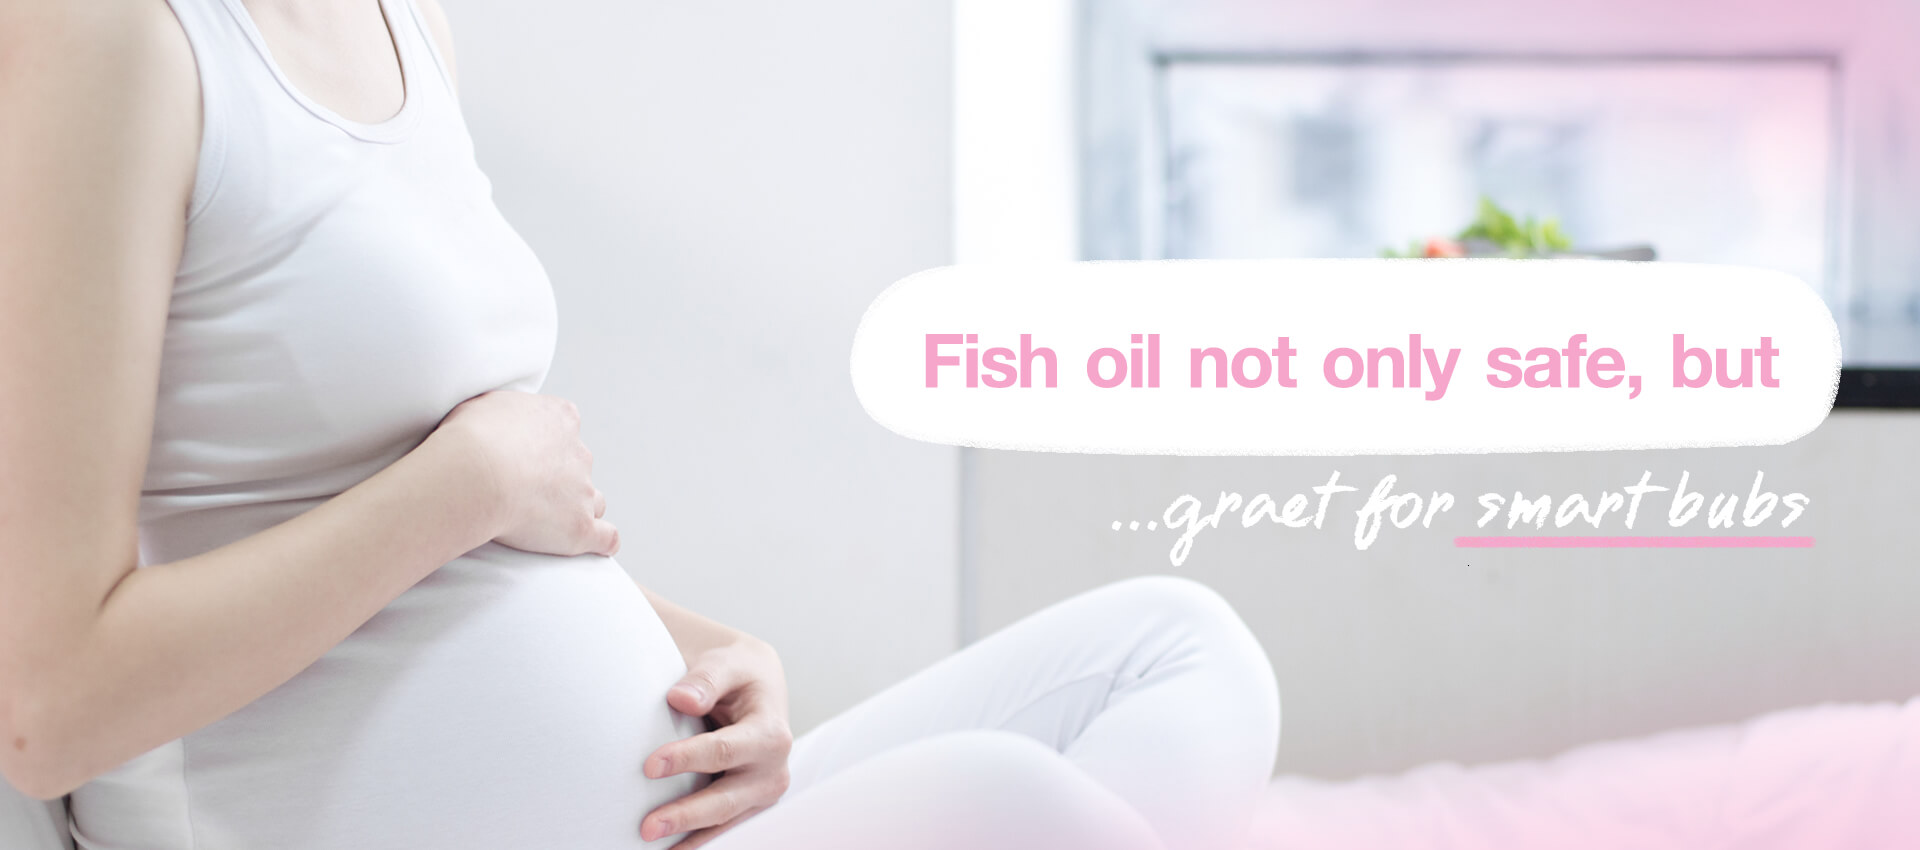 Fish oil not only safe, but great for smart bubs